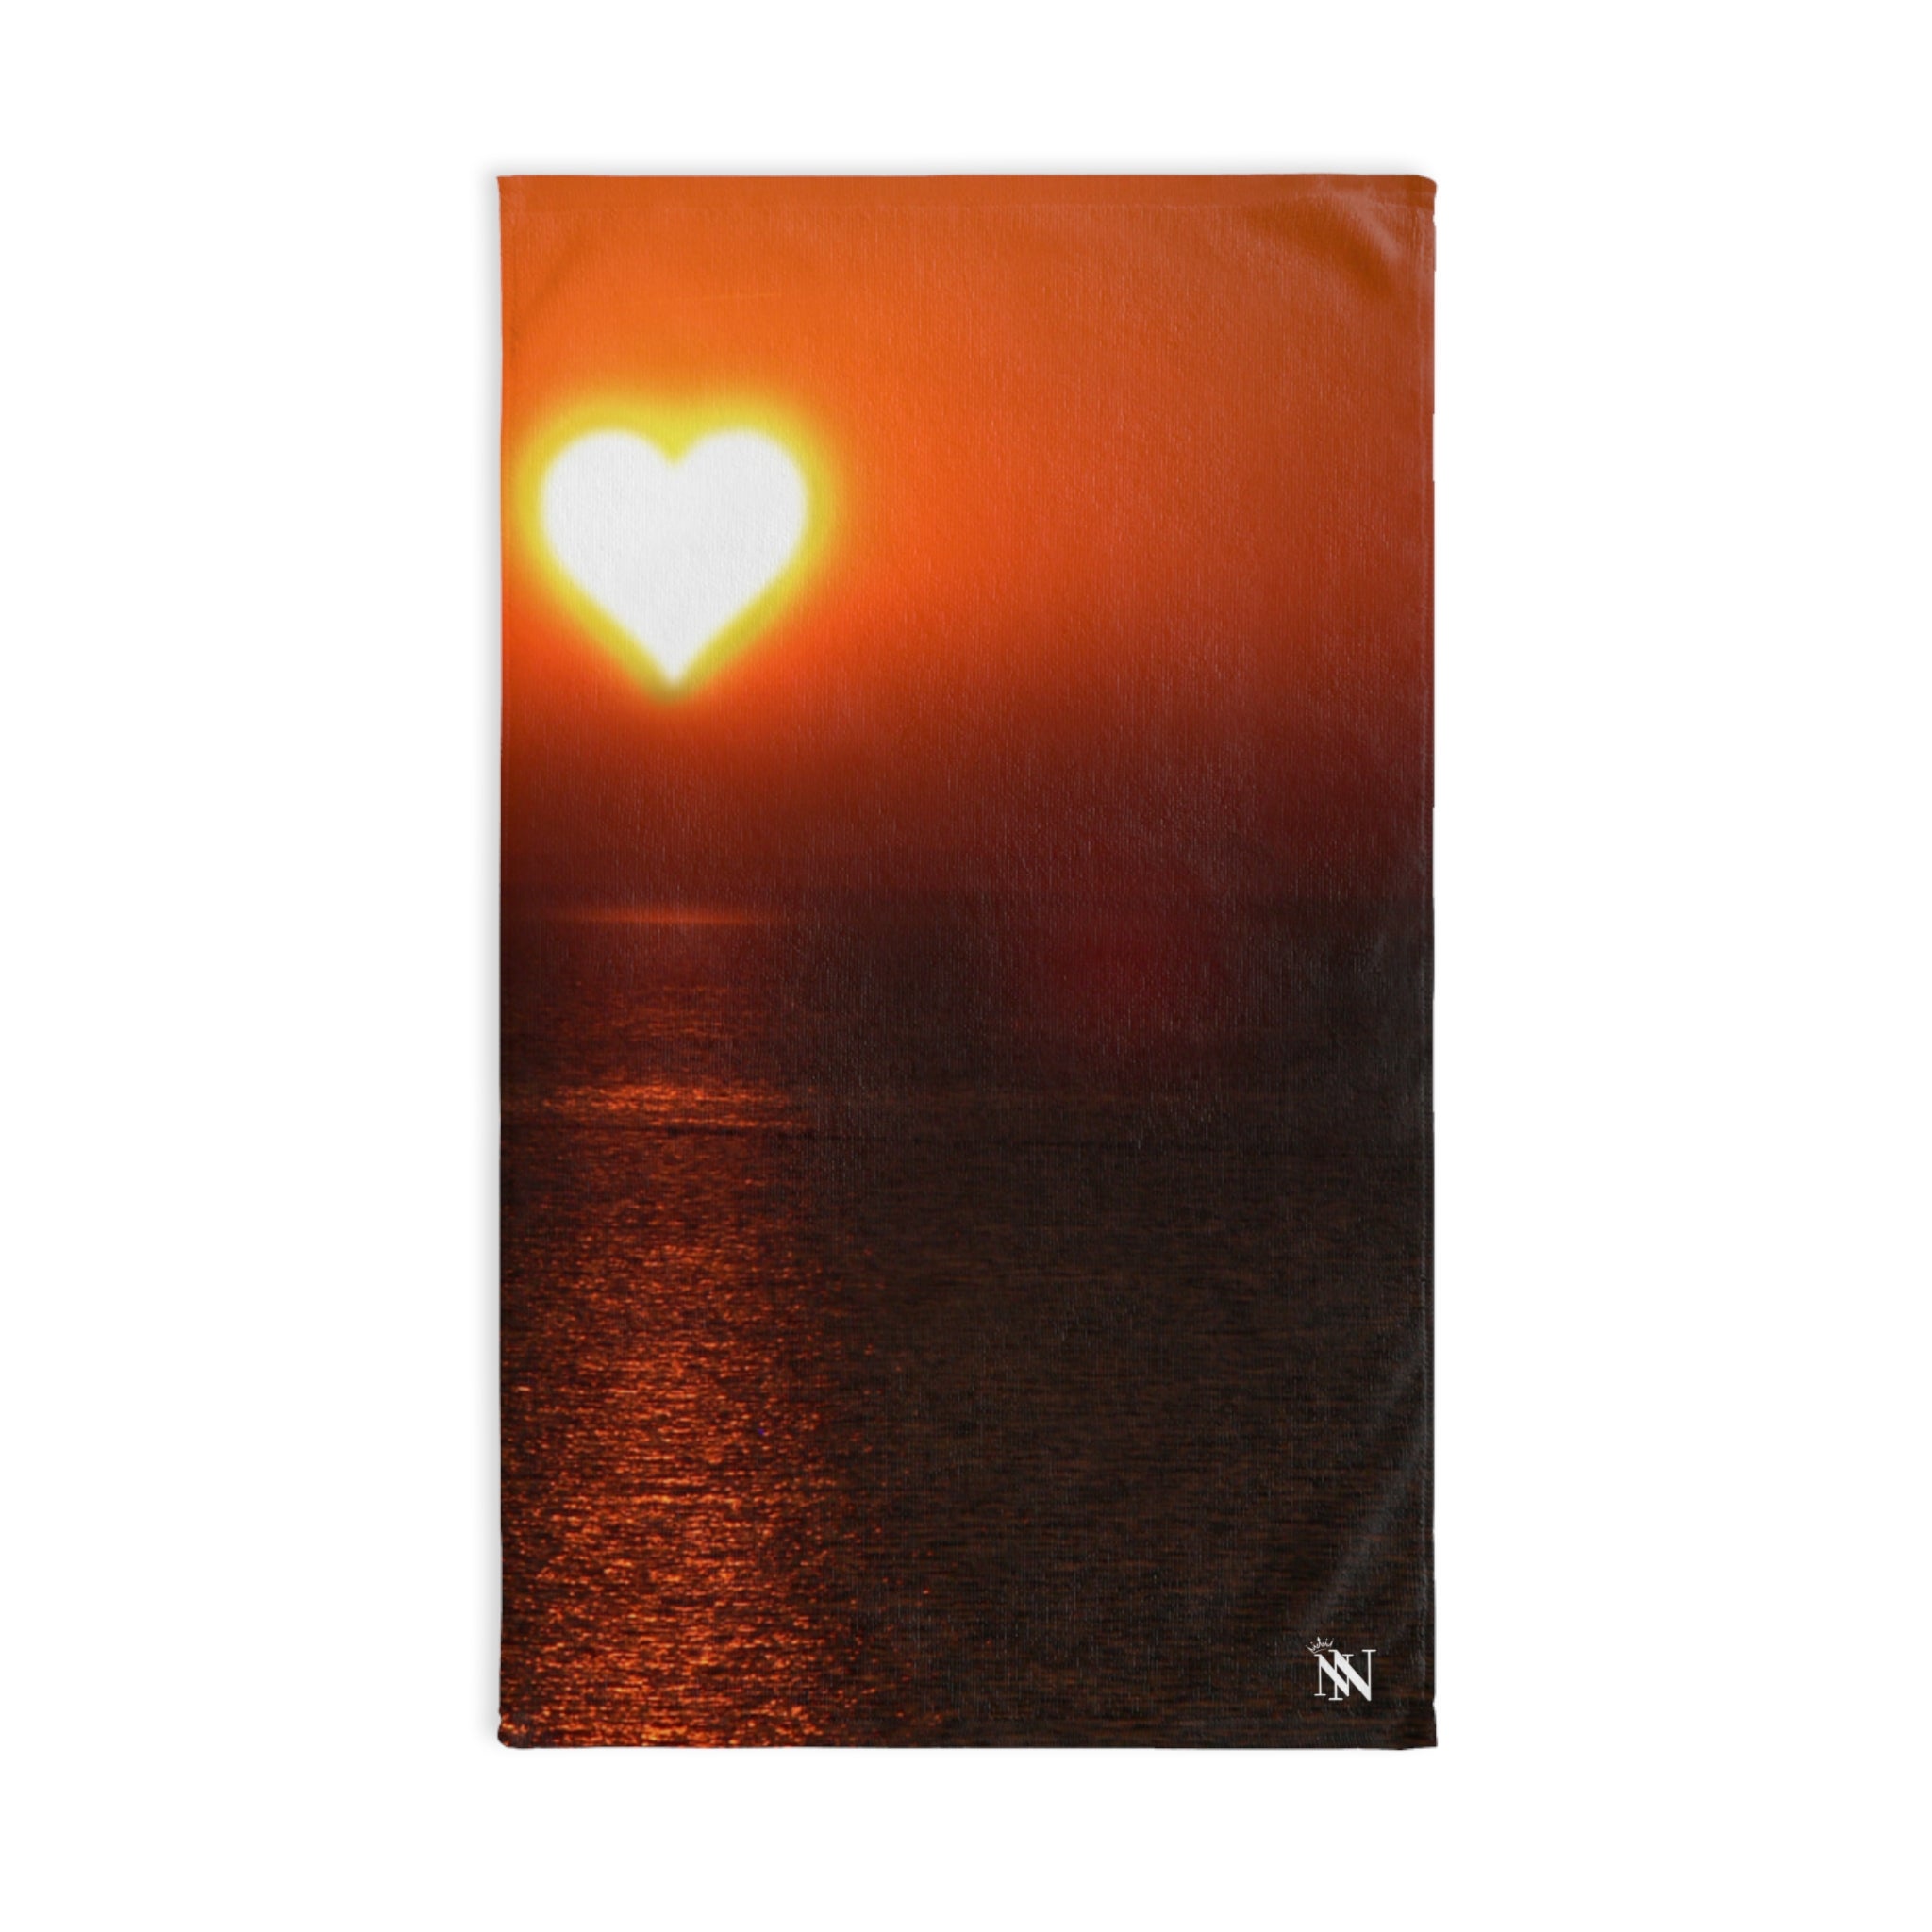 Sunset Heart Sun 3D White | Funny Gifts for Men - Gifts for Him - Birthday Gifts for Men, Him, Her, Husband, Boyfriend, Girlfriend, New Couple Gifts, Fathers & Valentines Day Gifts, Christmas Gifts NECTAR NAPKINS